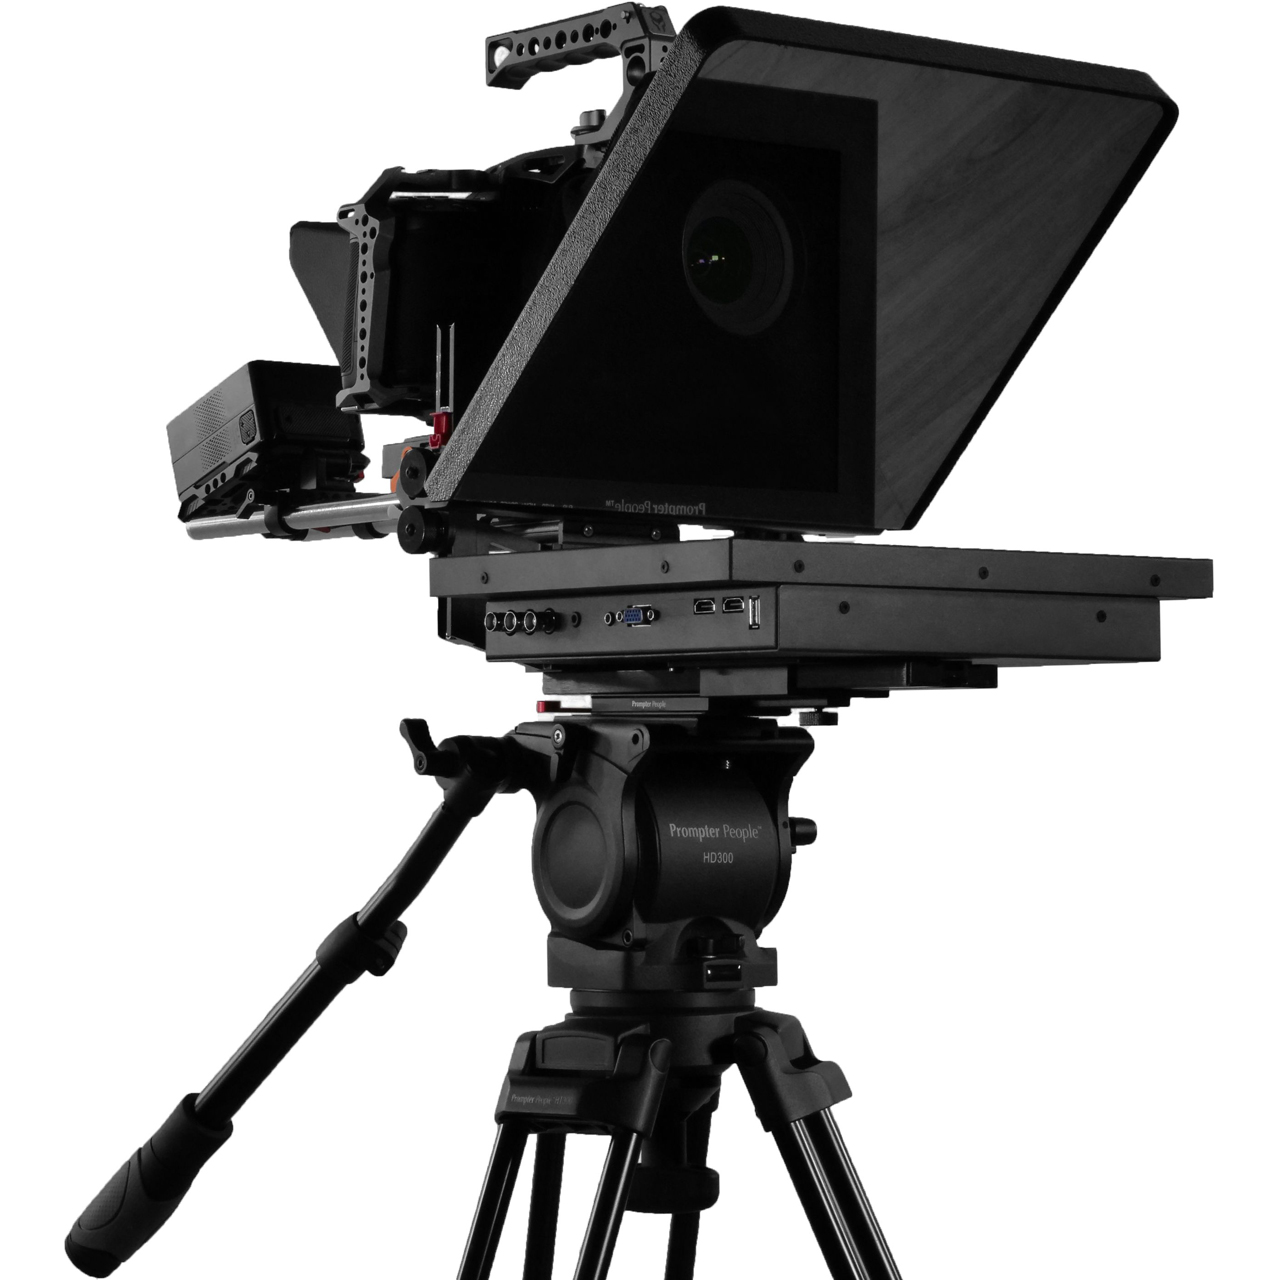 Prompter People PROP-15MM-12 ProLine Plus 12 Teleprompter - 12 Inch Reversing Monitor with HDMI / VGA PROP-15MM-12